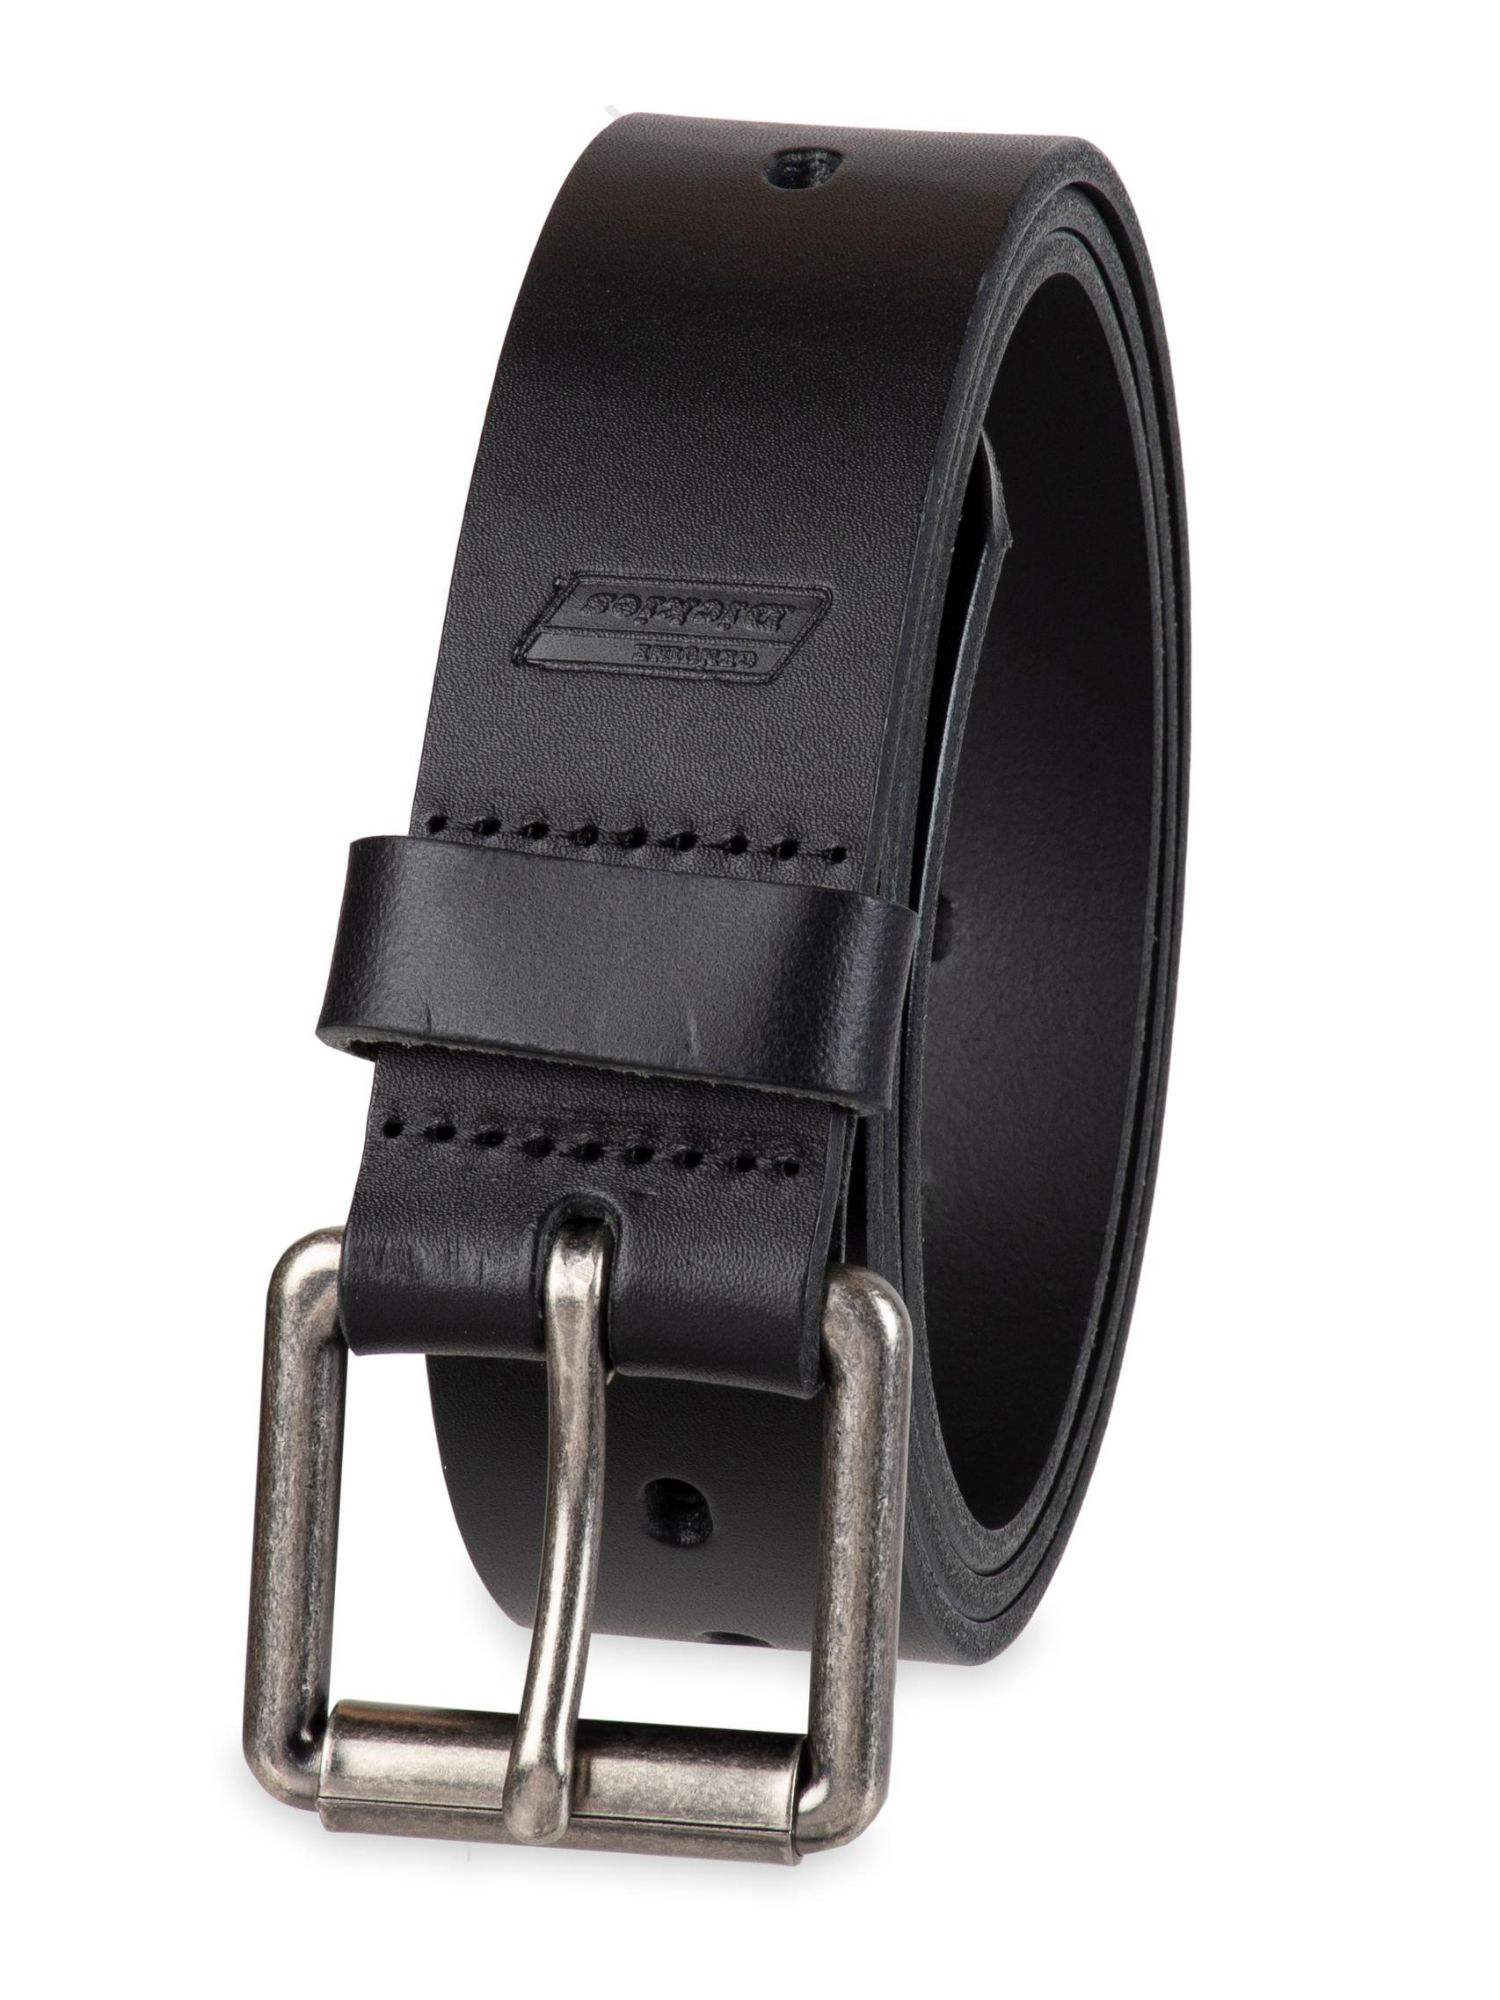 Genuine Dickies Men's Black Fully Adjustable Perforated Leather Belt (Regular and Big & Tall Sizes) - image 3 of 6